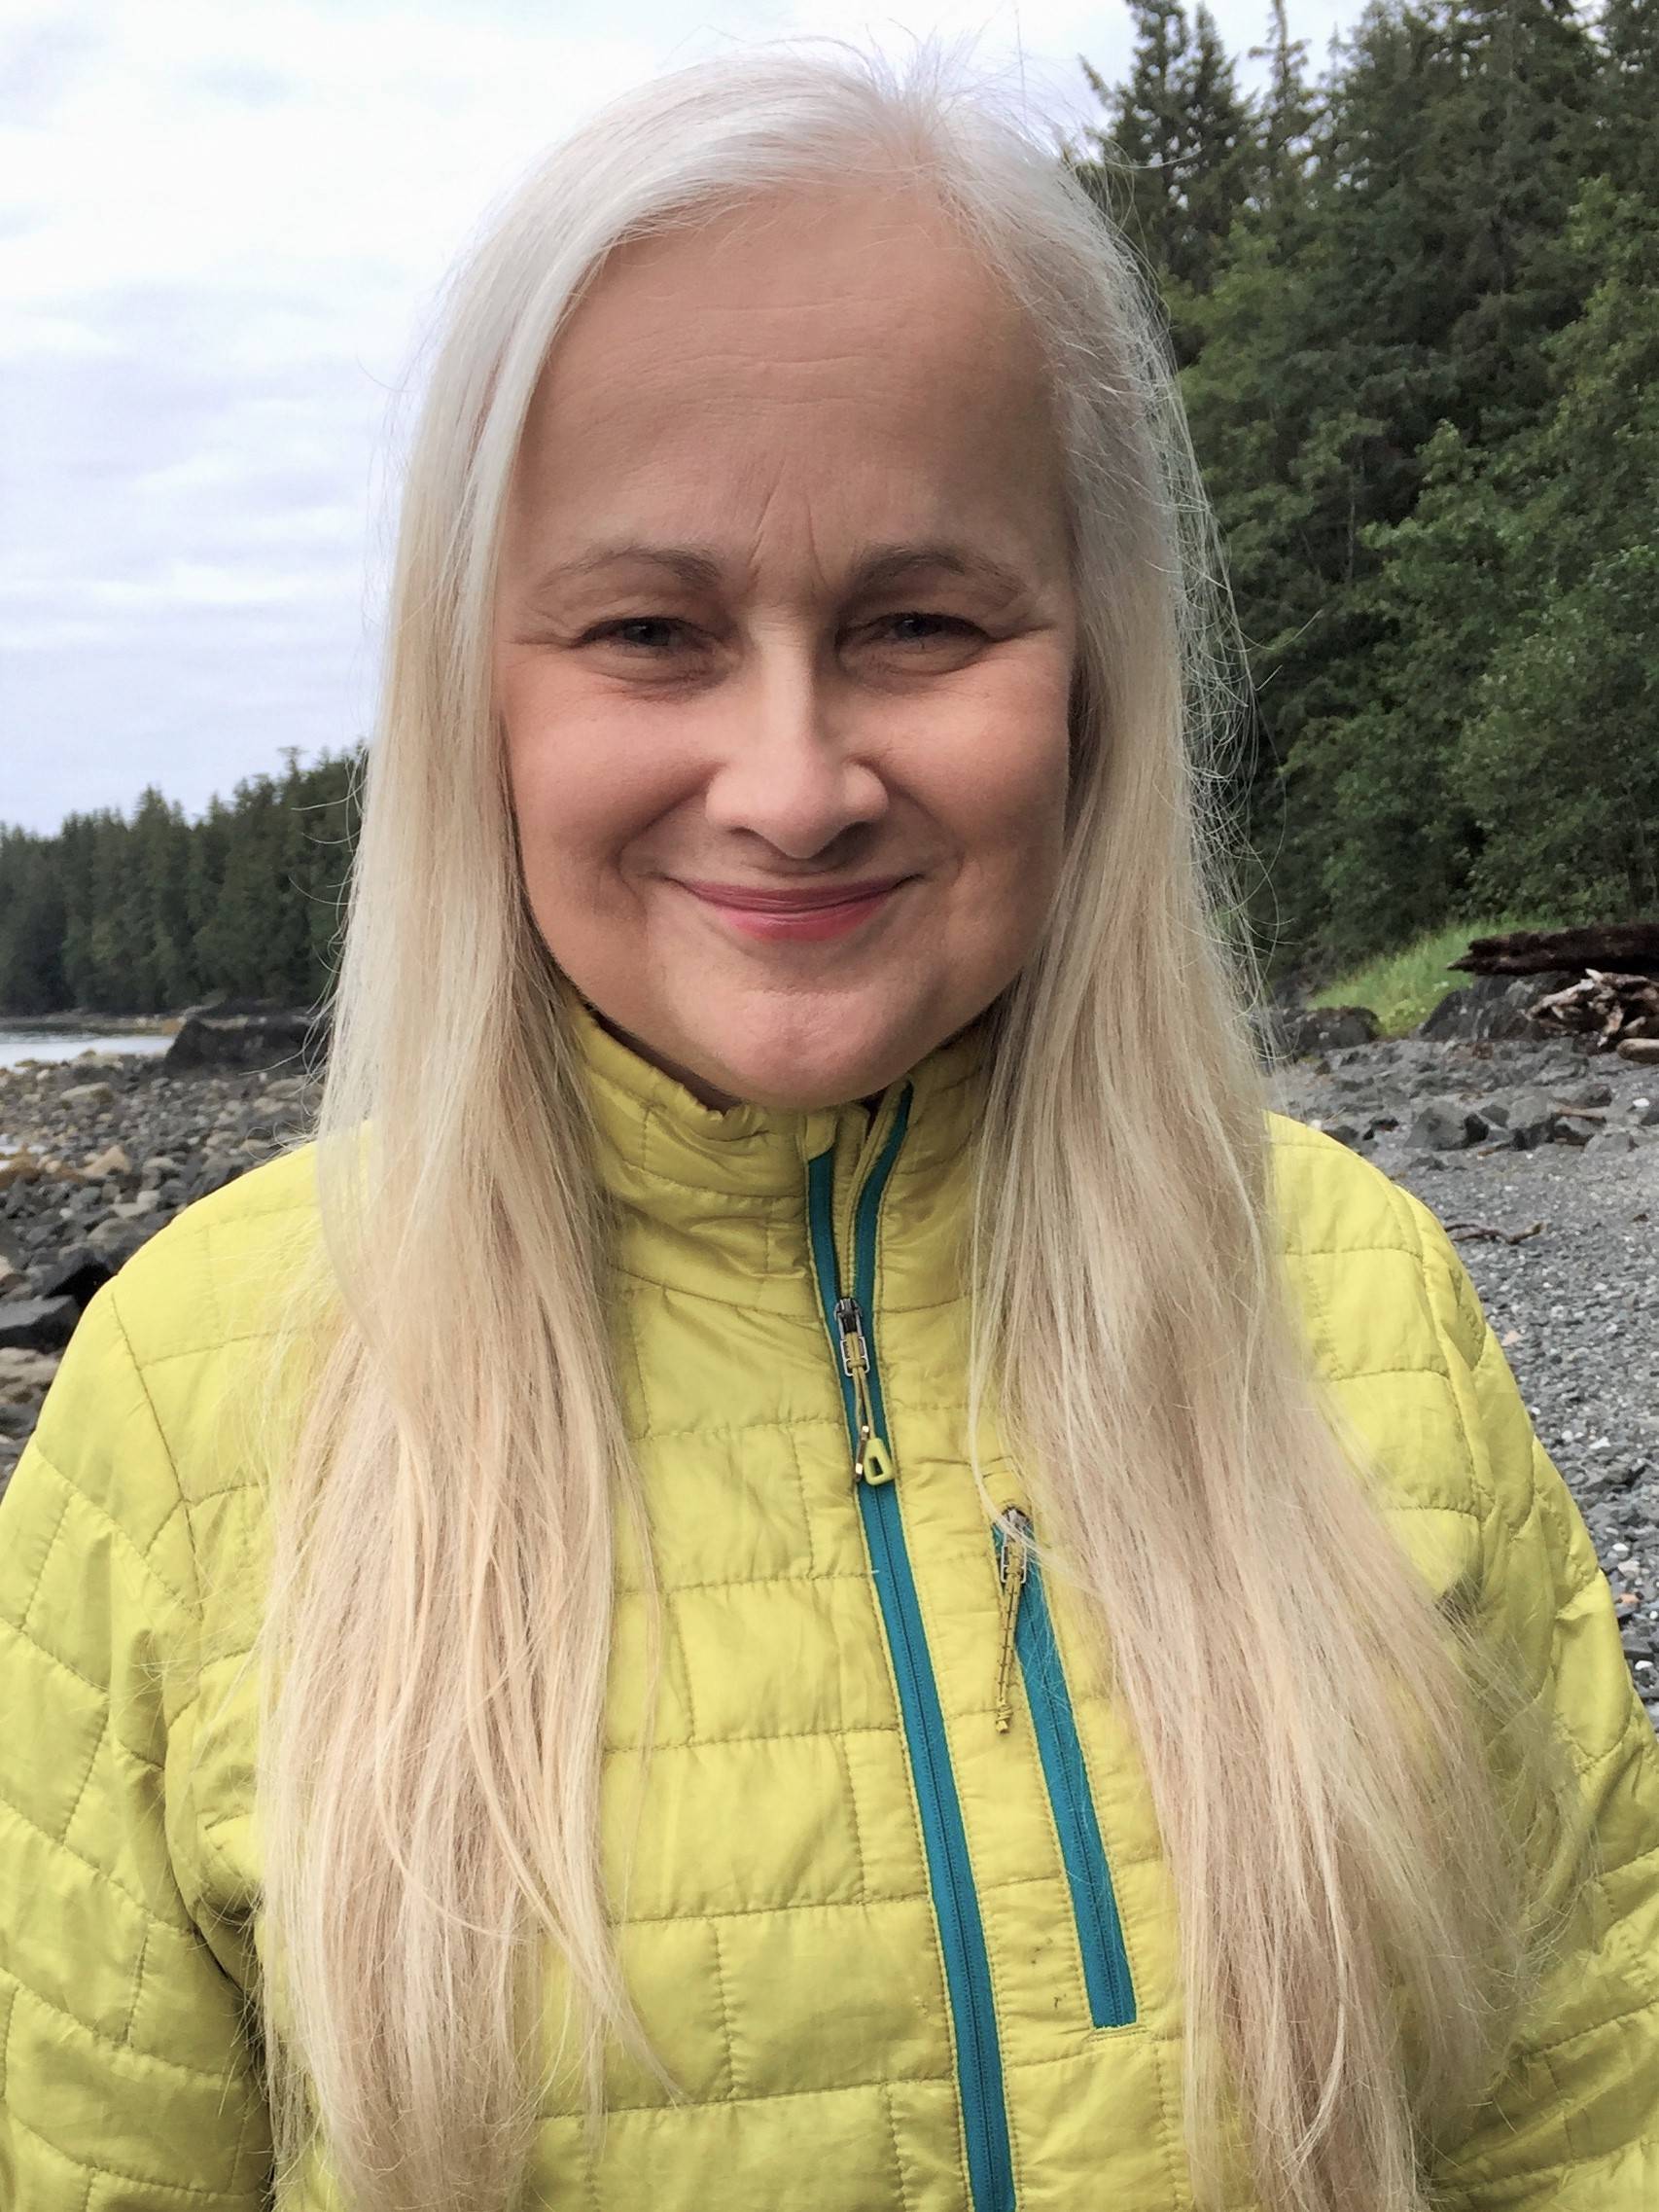 Maria Gladziszewski is a candidate for City and Borough of Juneau Assembly’s areawide seat.